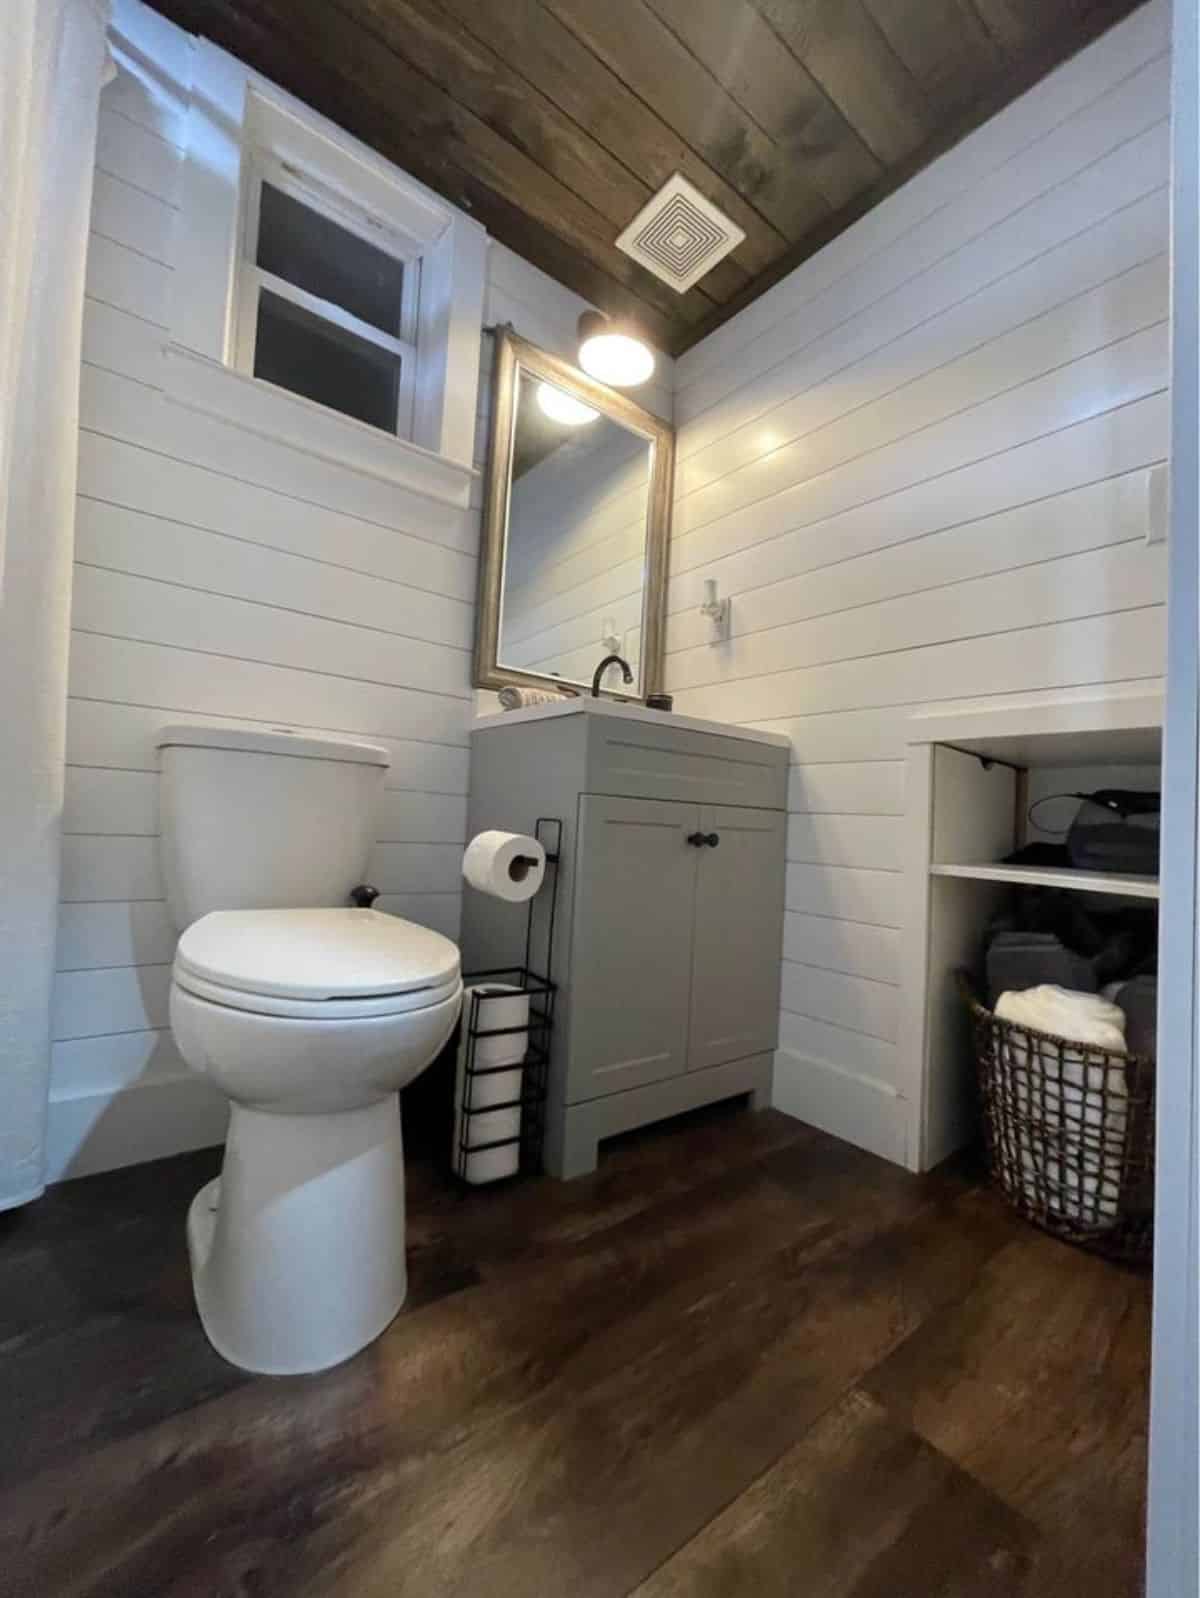 bathroom of fully furnished tiny home has all the standard fittings